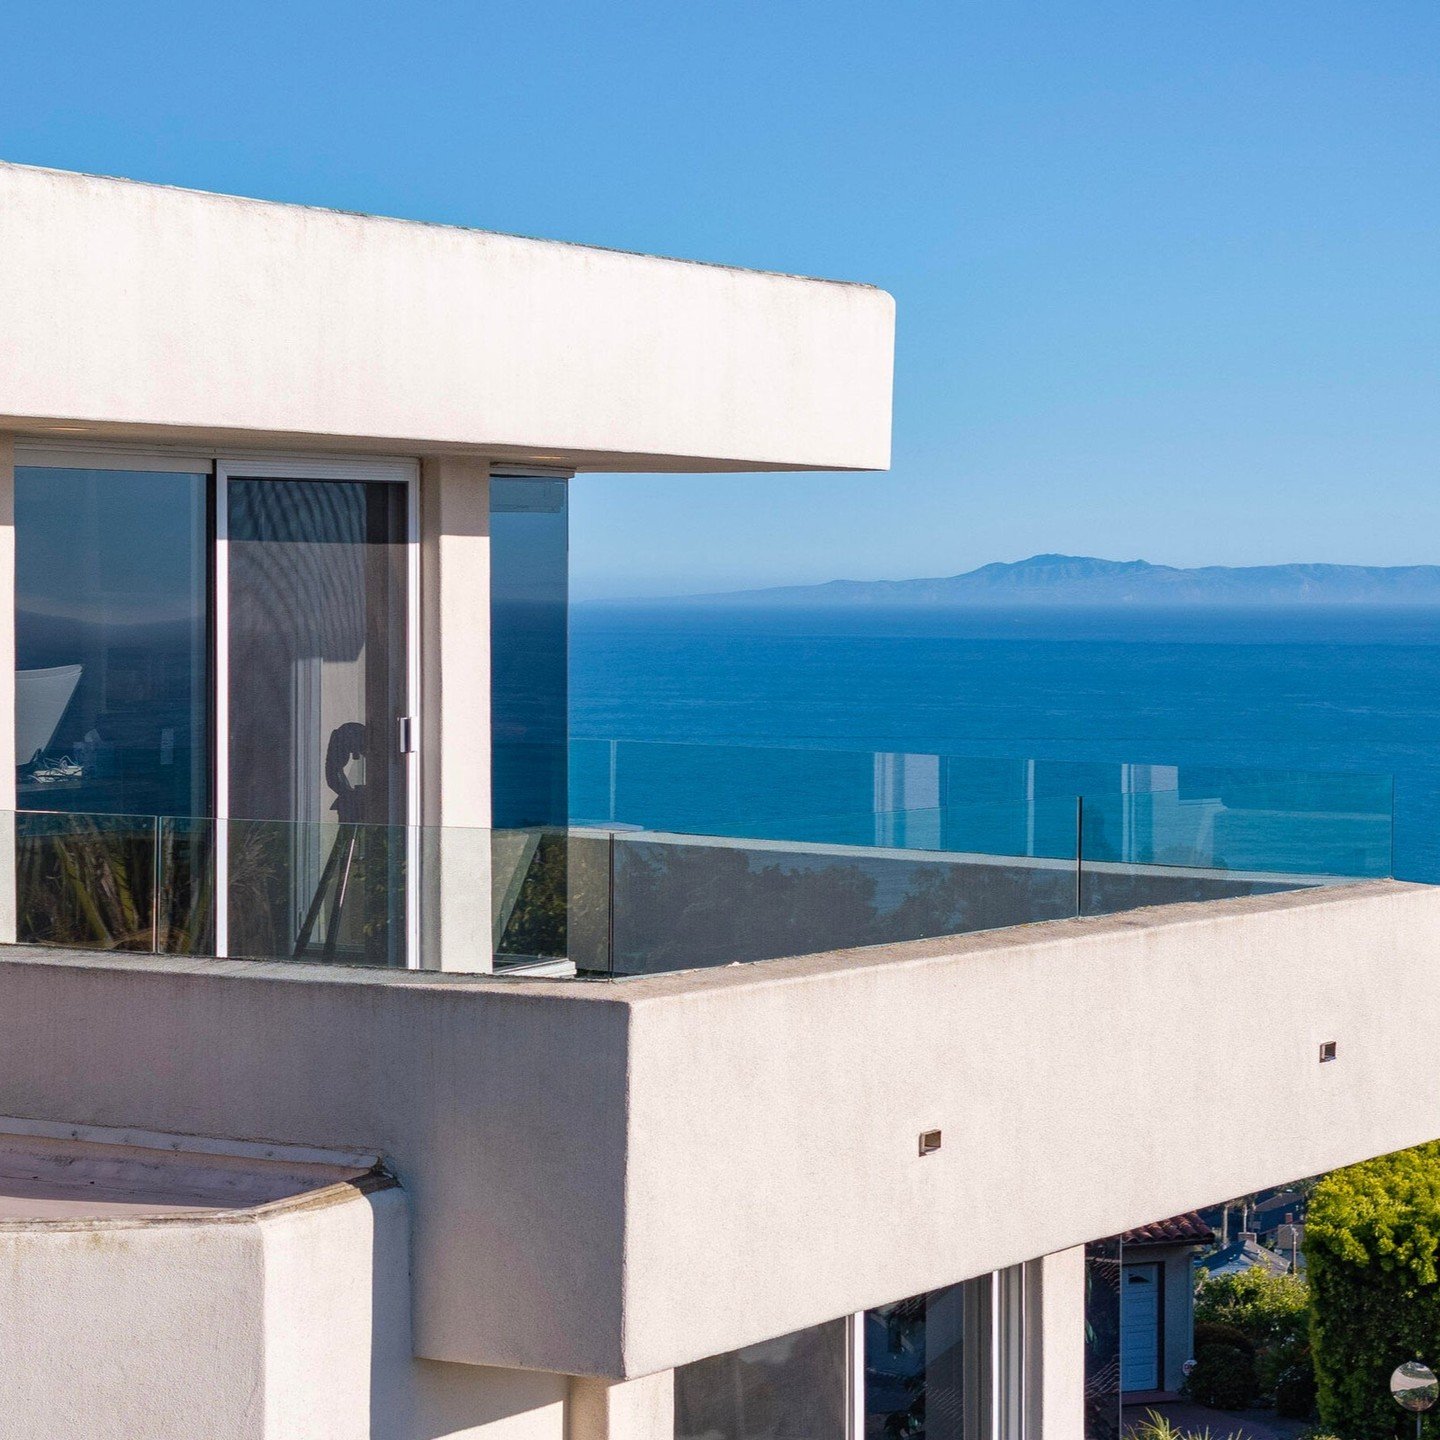 NEW LISTING ALERT! 1615 La Vista Del Oceano offers insane views from 4bd/4.5ba home. With vistas visible from every room, including the large primary bedroom suite, this residence seamlessly blends luxury with comfort. Listed by @rondickman_sb for $8